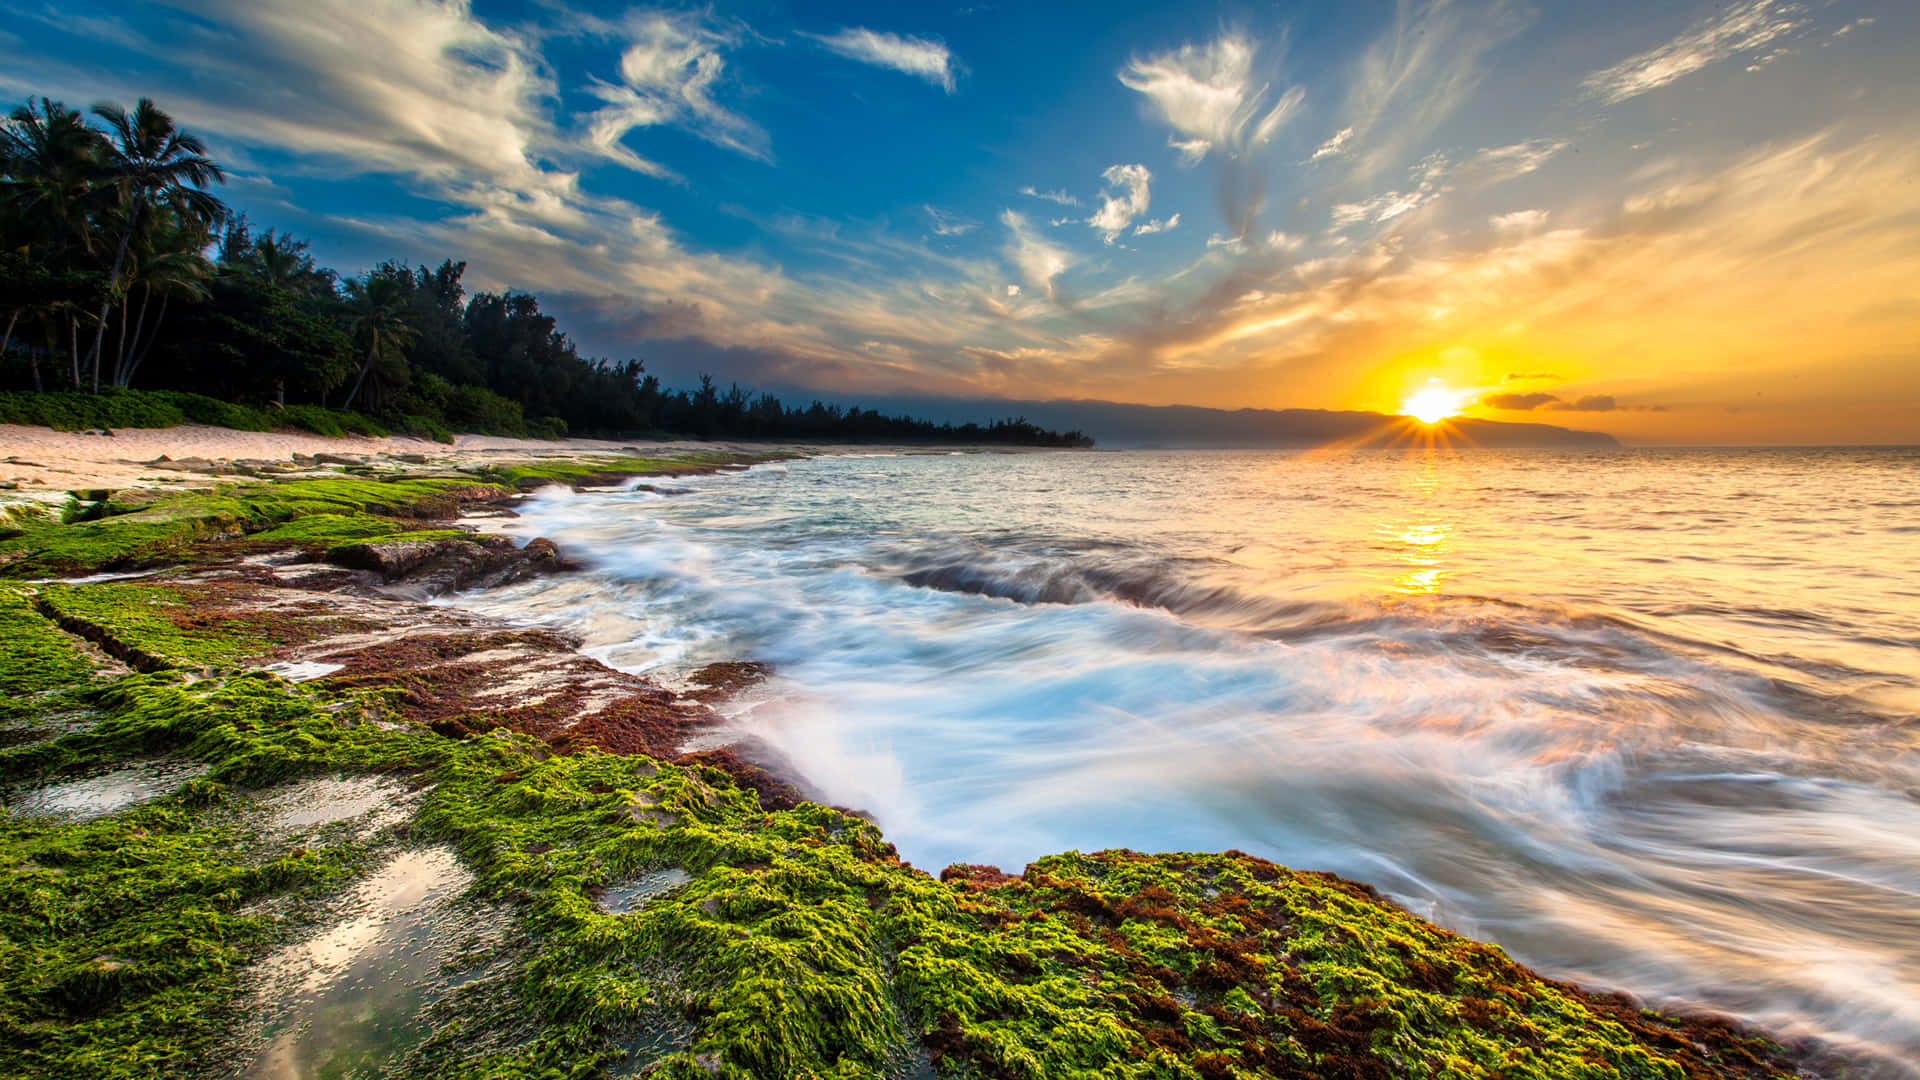 A tranquil sunset viewed from the picturesque shores of Hawaii